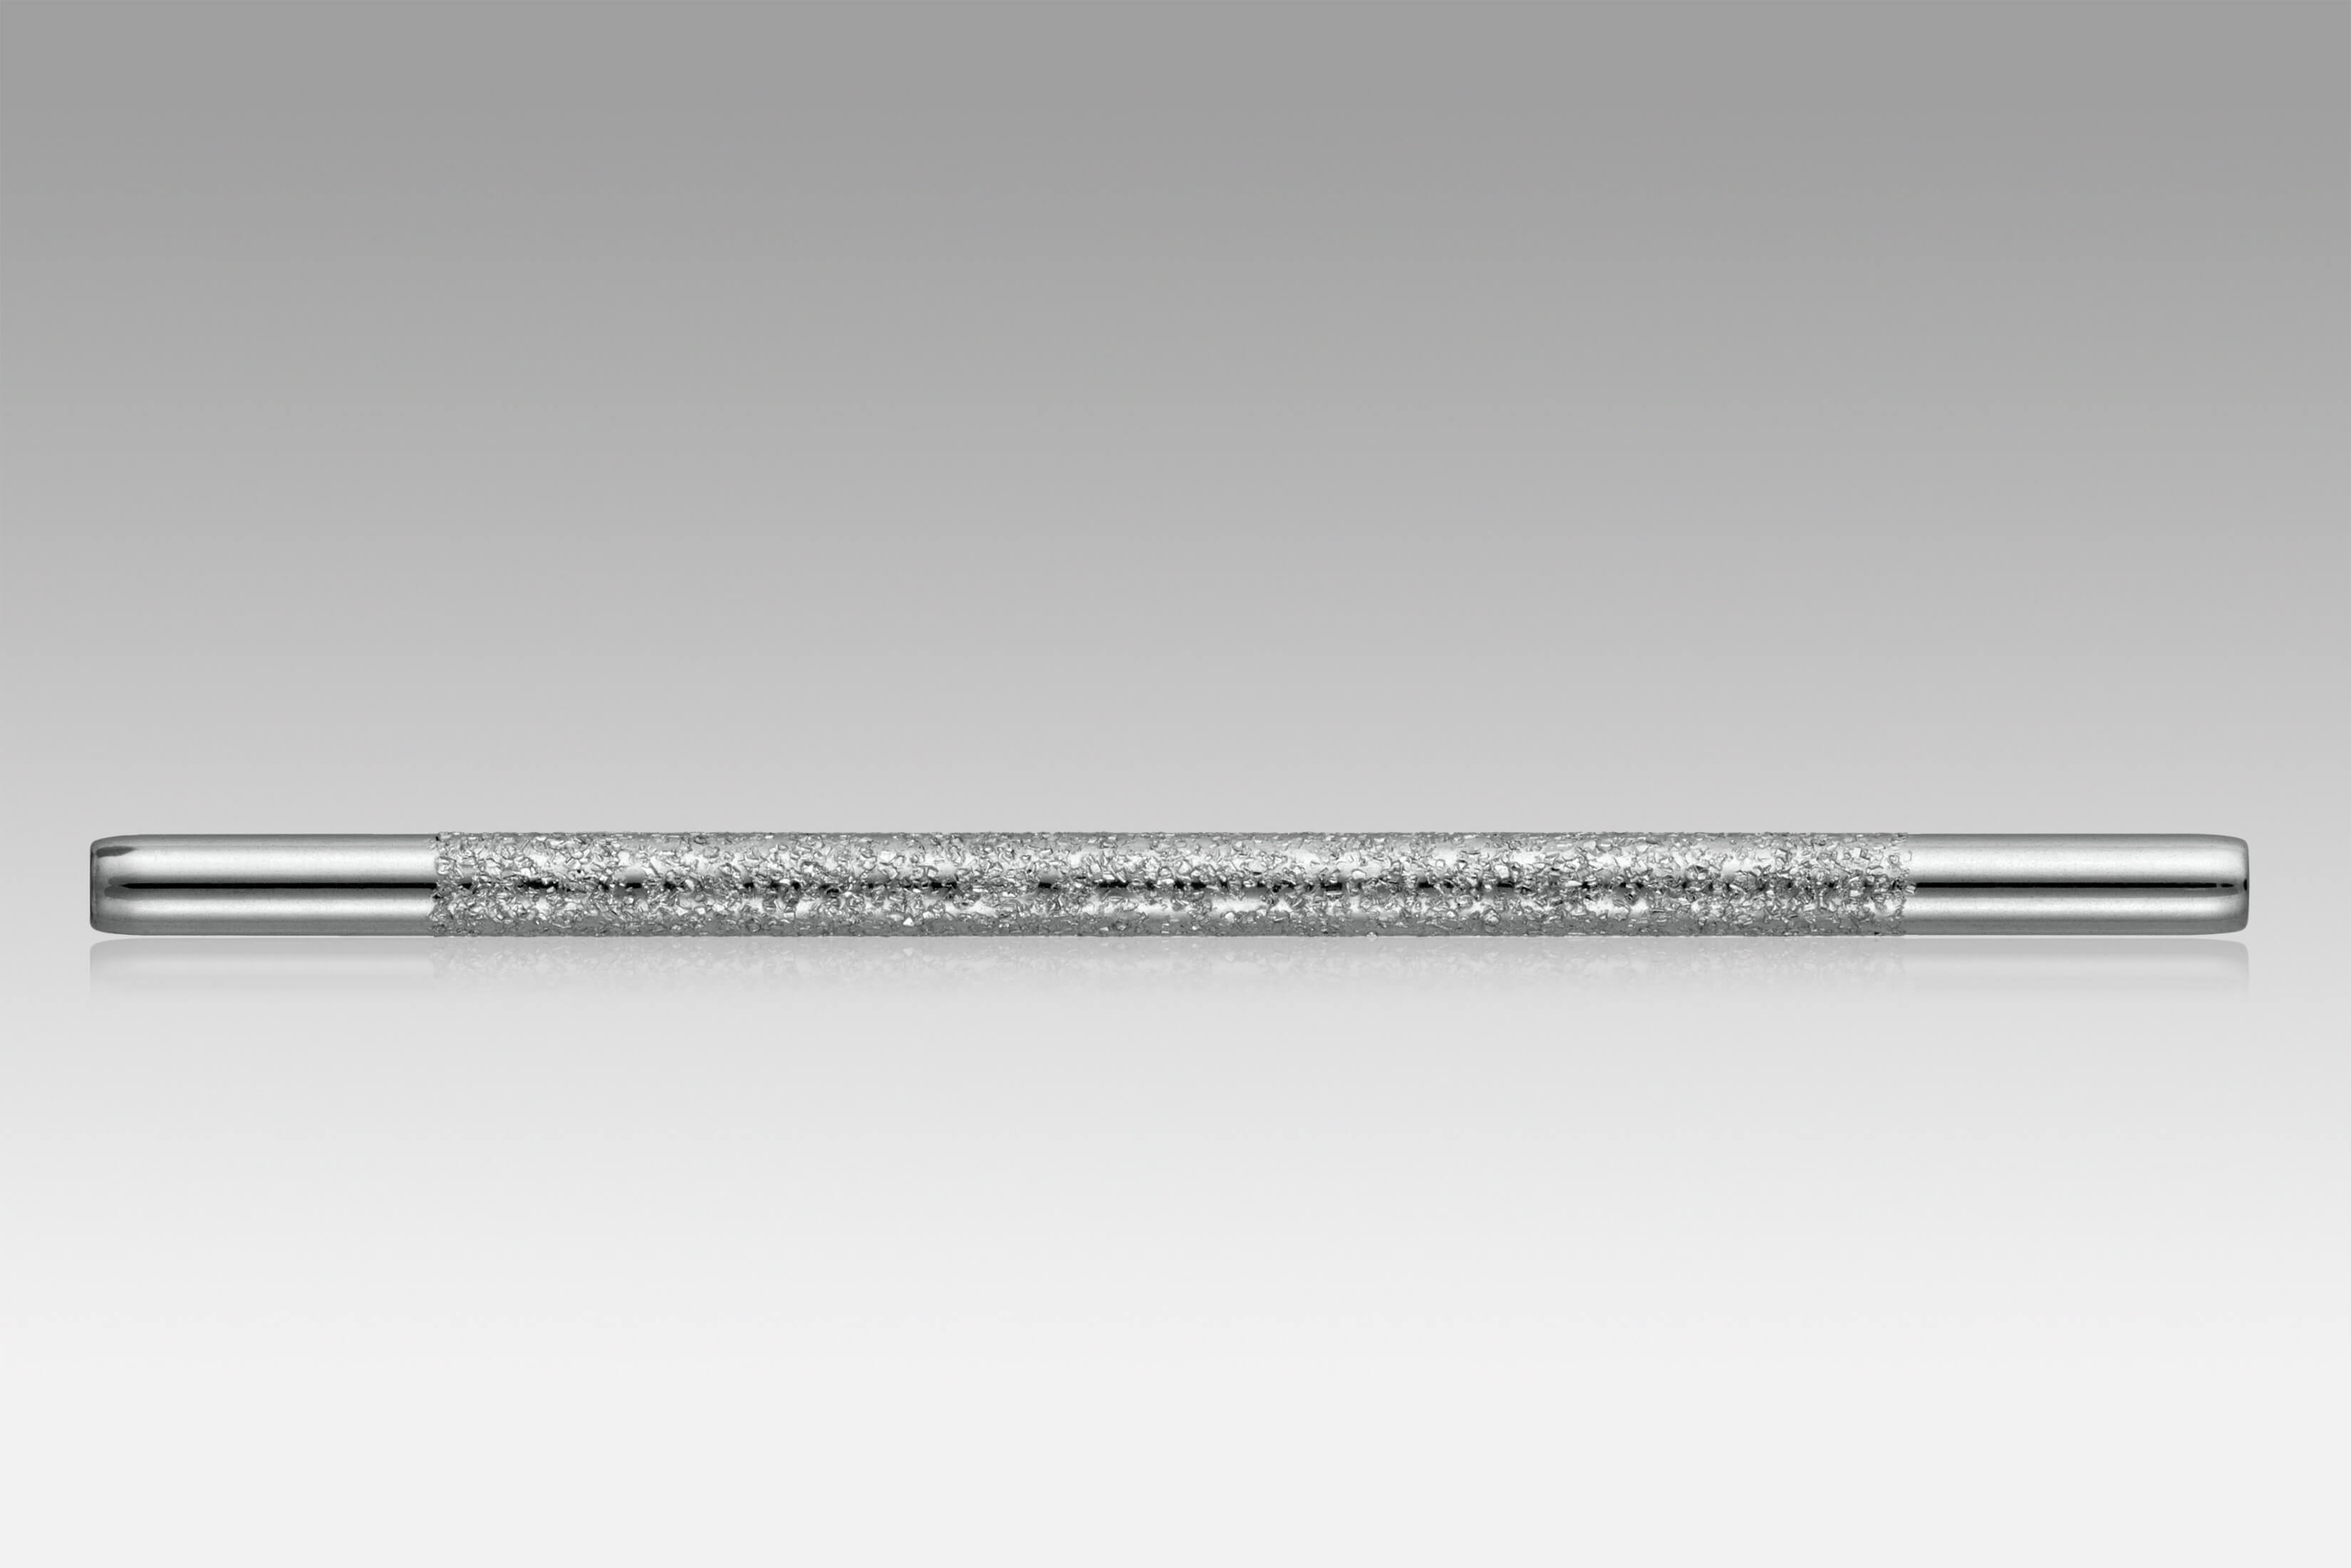 : Frosted shaft - Swiss supplier and manufacturer of micro-parts for watchmaking